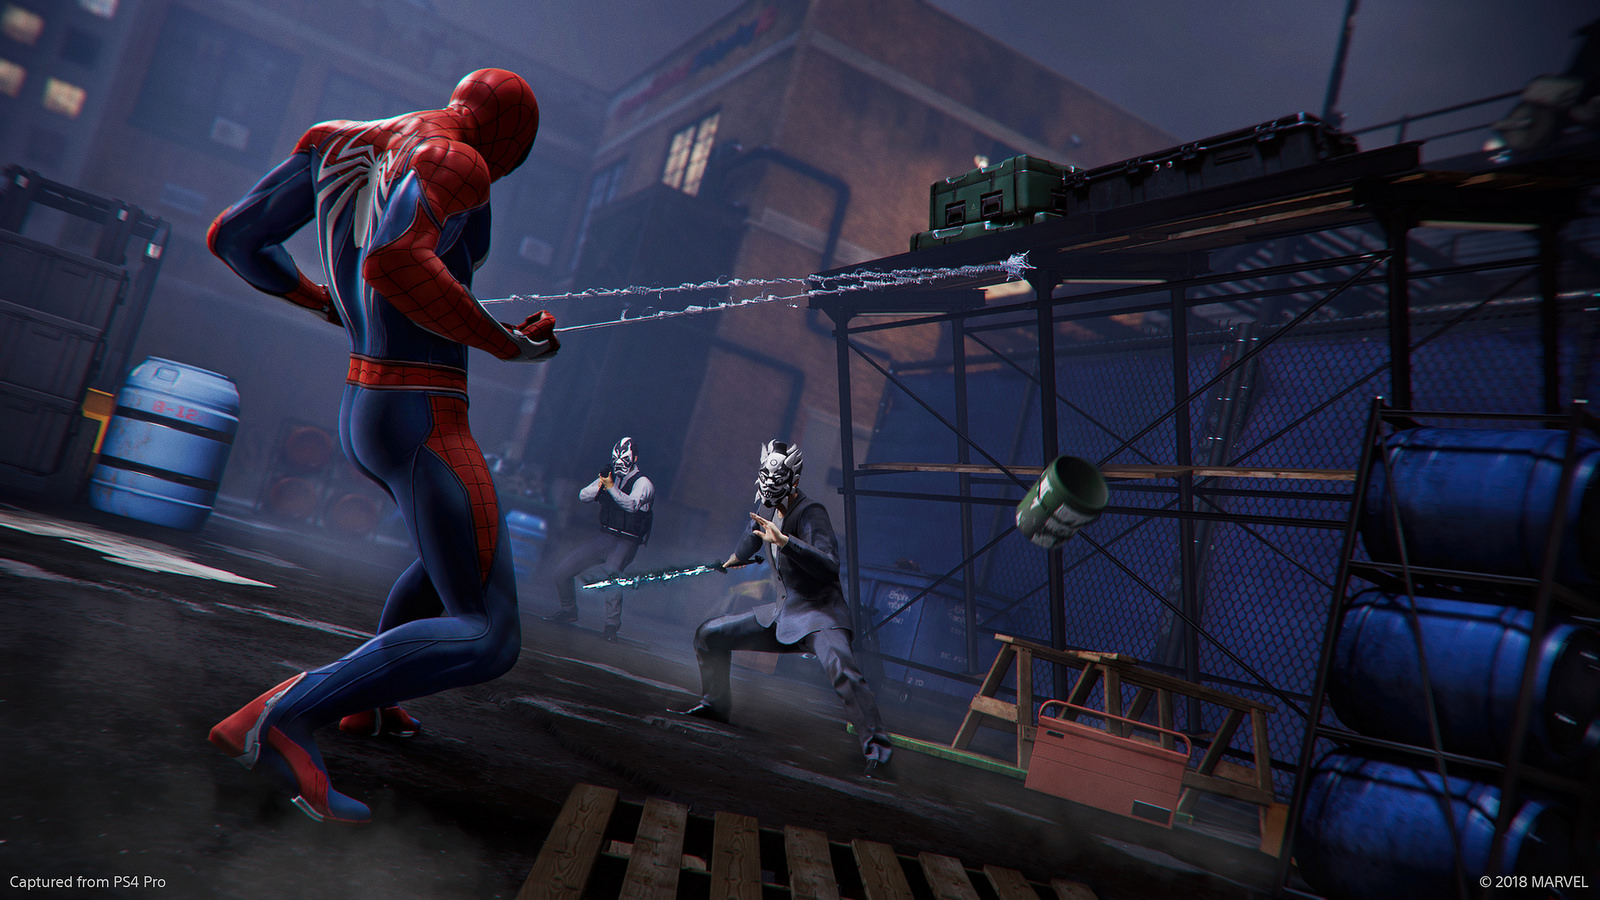 Spider-Man (ENG) – Collector's Edition 